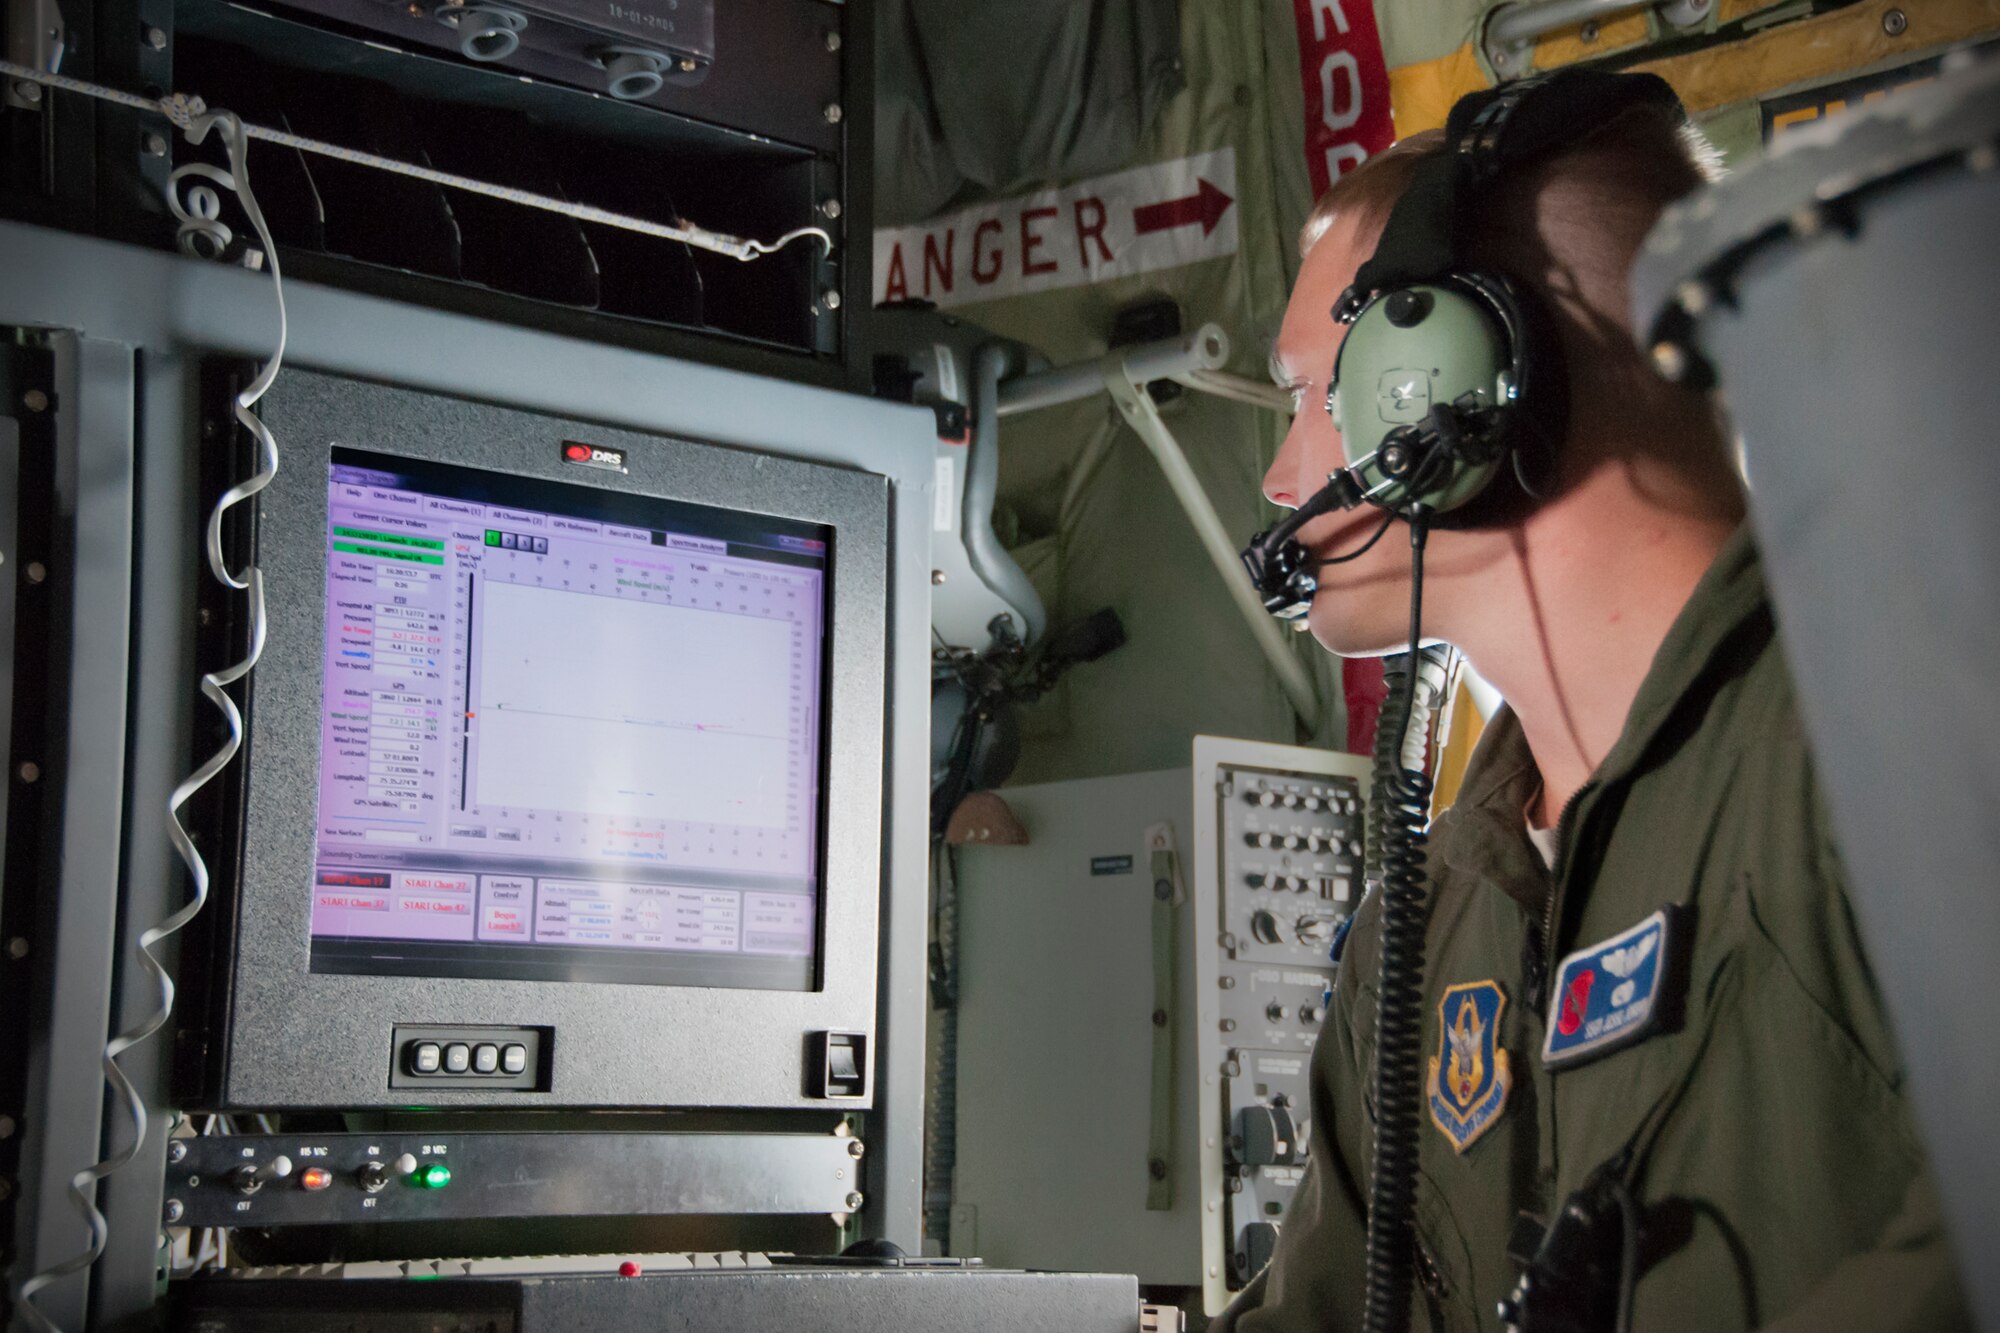 Staff Sgt. Jesse Jordan, 53d Weather Reconnaissance Squadron loadmaster, monitors weather data after deploying a dropsonde during a flight off of the east coast of the United States, June 28, 2016. A dropsonde is used by the Hurricane Hunters to collect temperature, humidity, wind speed and direction of weather systems. The information is then sent to the National Hurricane Center in Miami to monitor tropical storms. As part of the 100th anniversary of air power in the U.S. military, members of the media were invited to fly with the Hurricane Hunters and learn about their weather surveillance mission. (U.S. Air Force photo/Staff Sgt. Kat Justen)